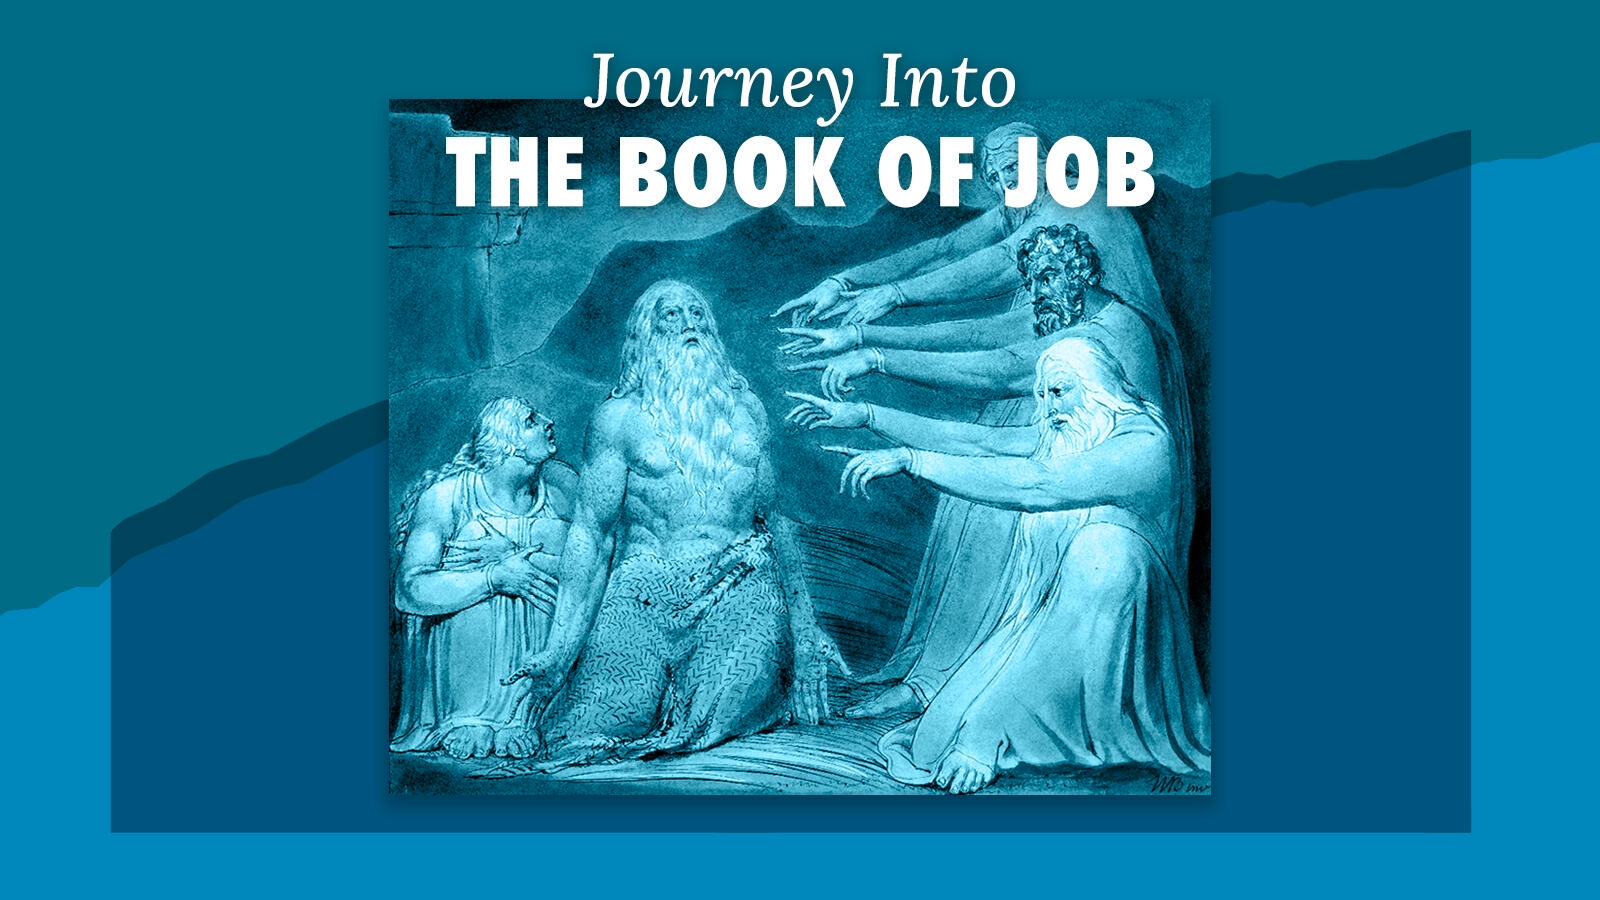 Journey into the Book of Job